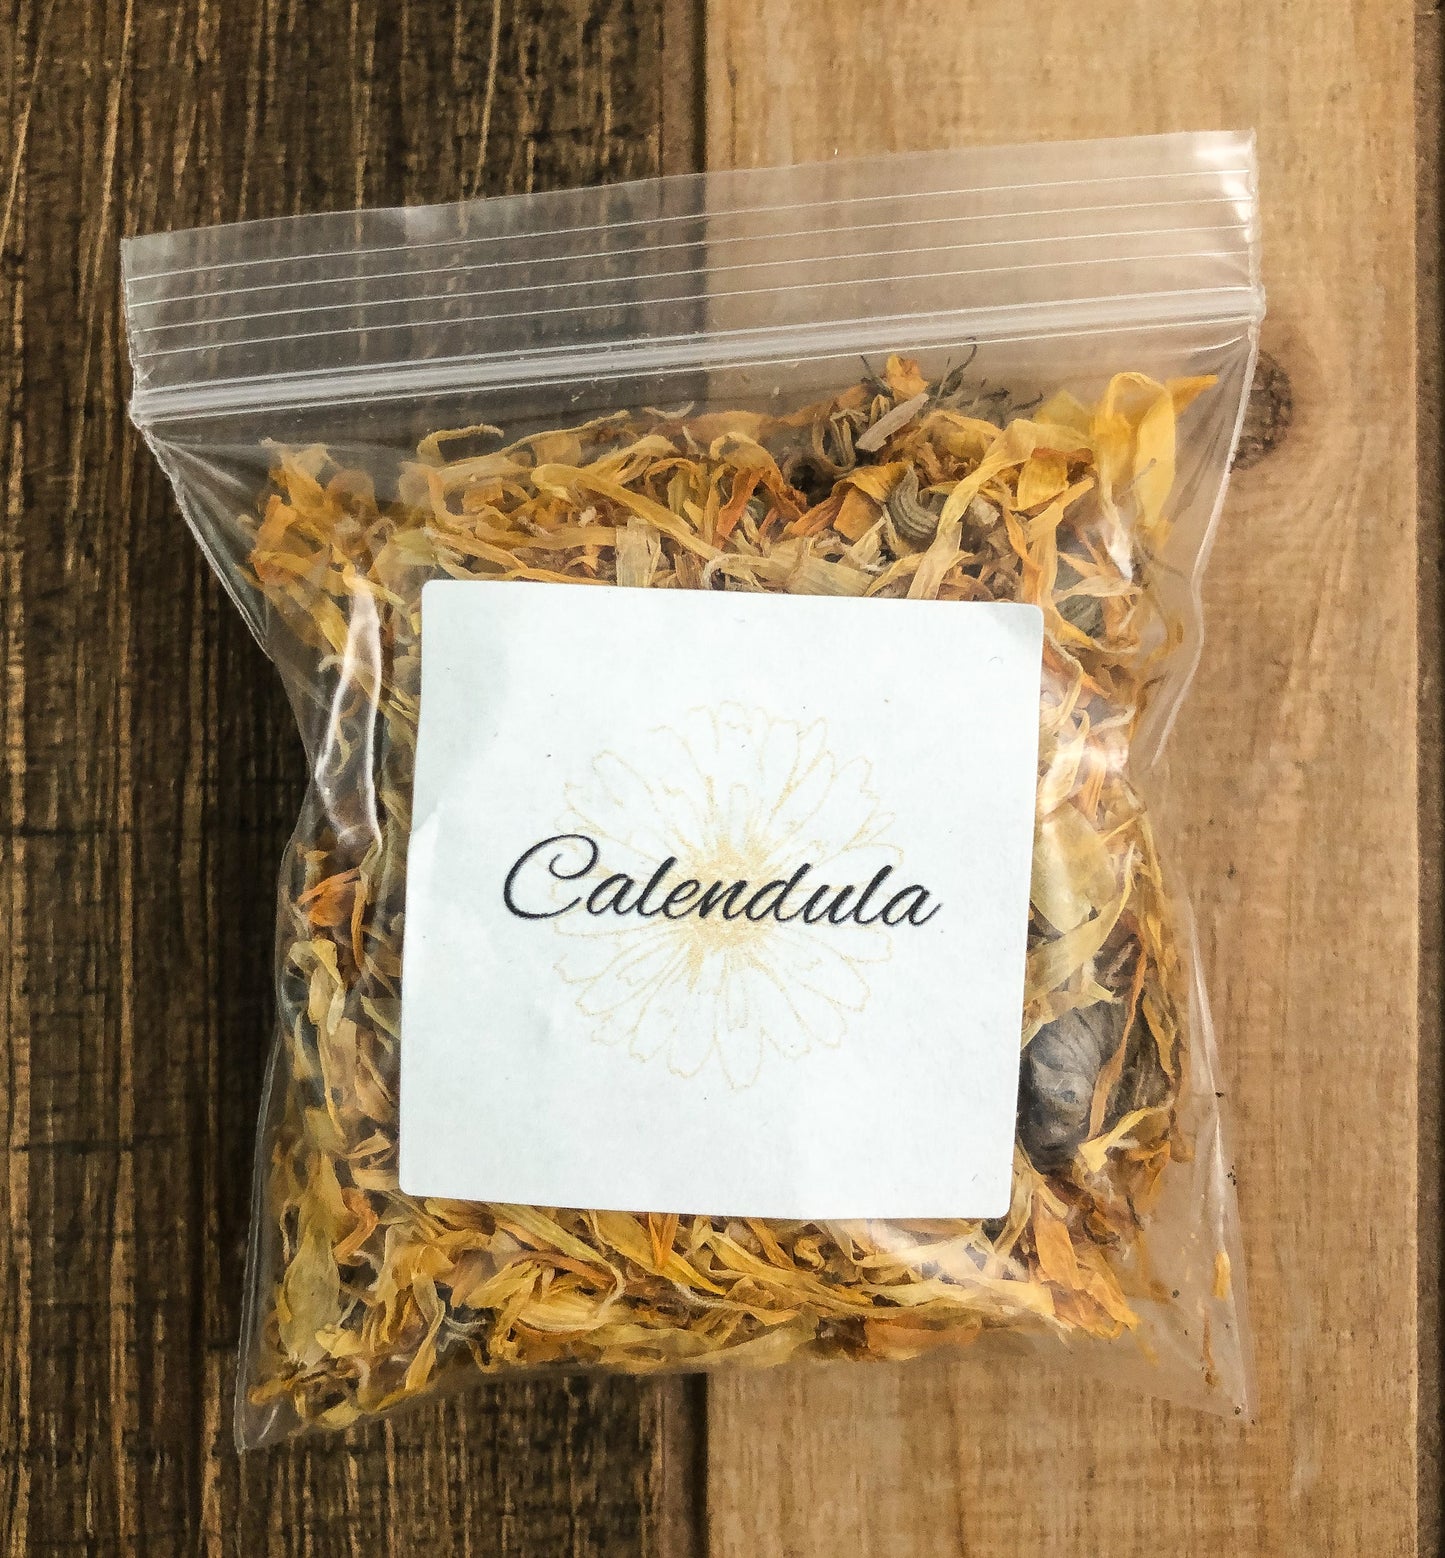 8g bag of dried calendula in a clear plastic bag with a wooden background